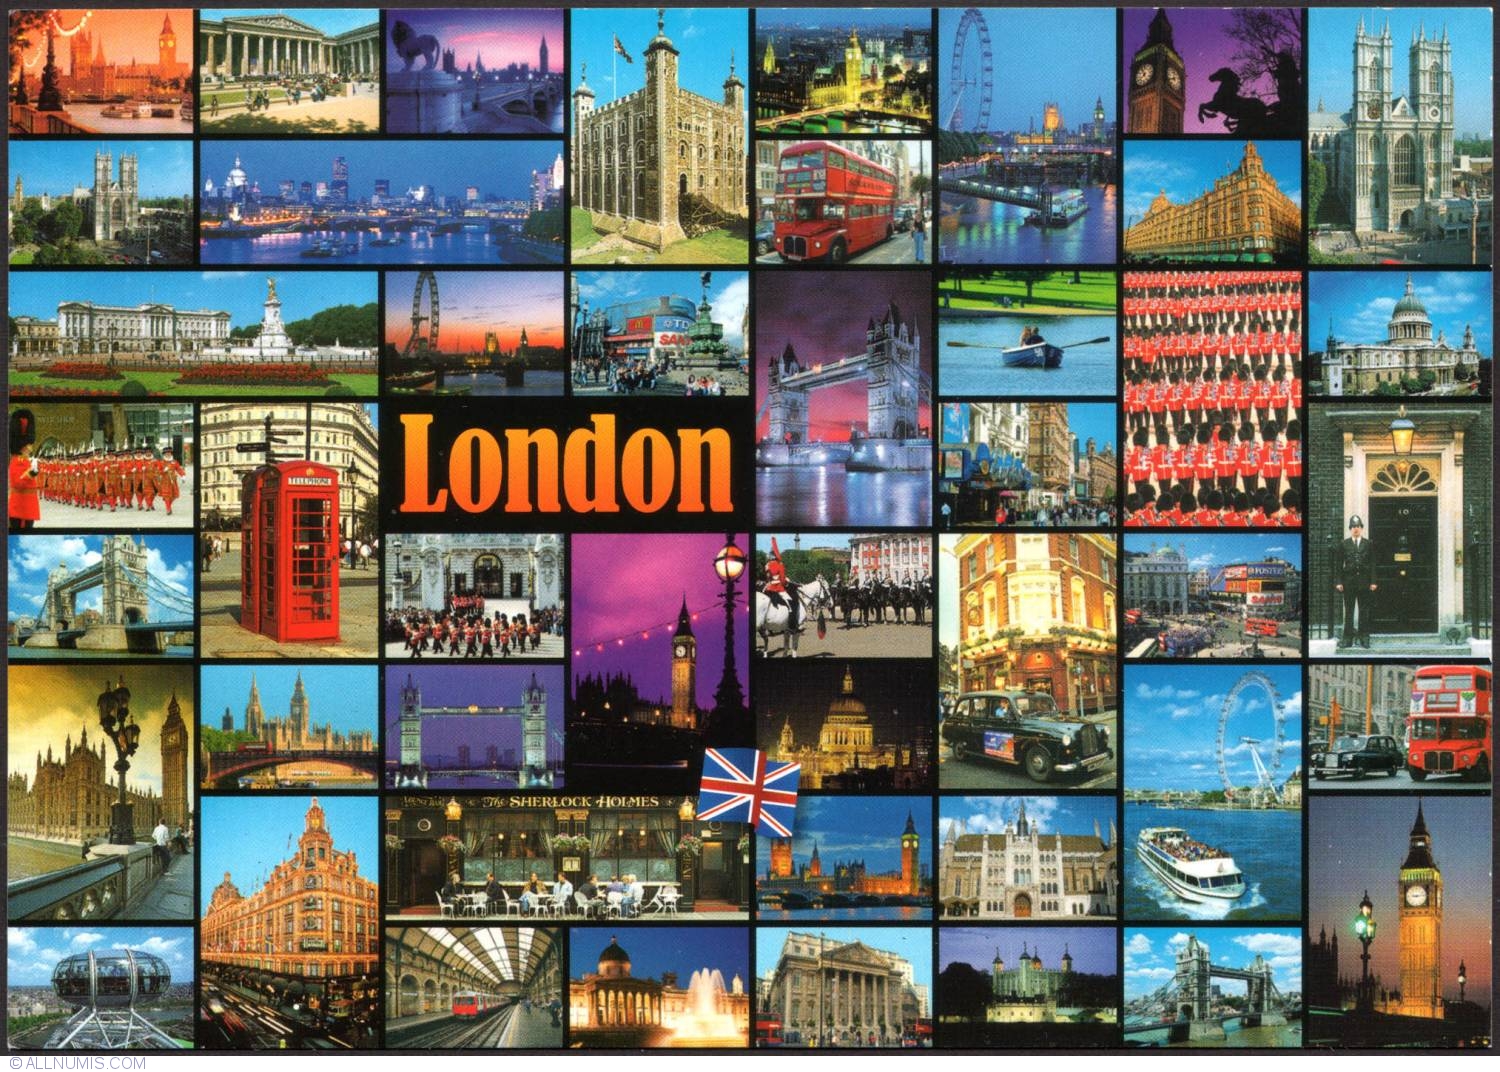 1 we from london. London Postcard. Postcard from London. Postcard about London. Greetings from London.